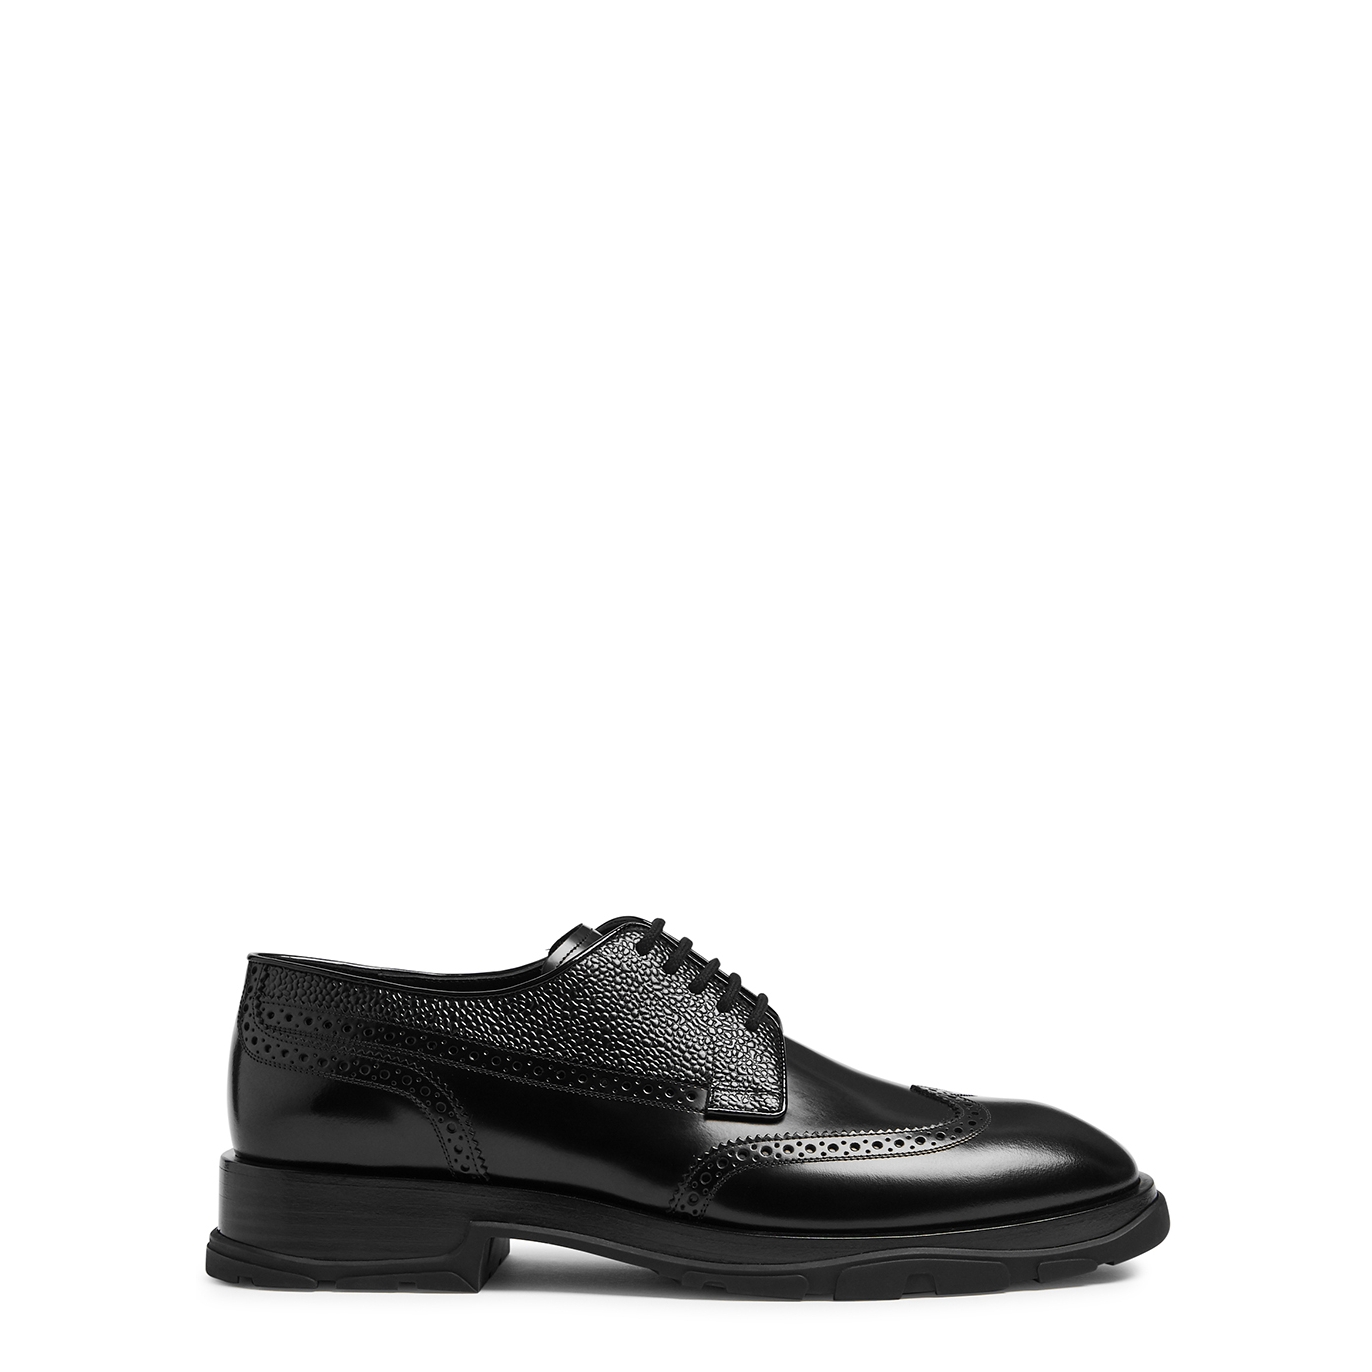 Alexander Mcqueen Panelled Leather Derby Shoes - Black - 7